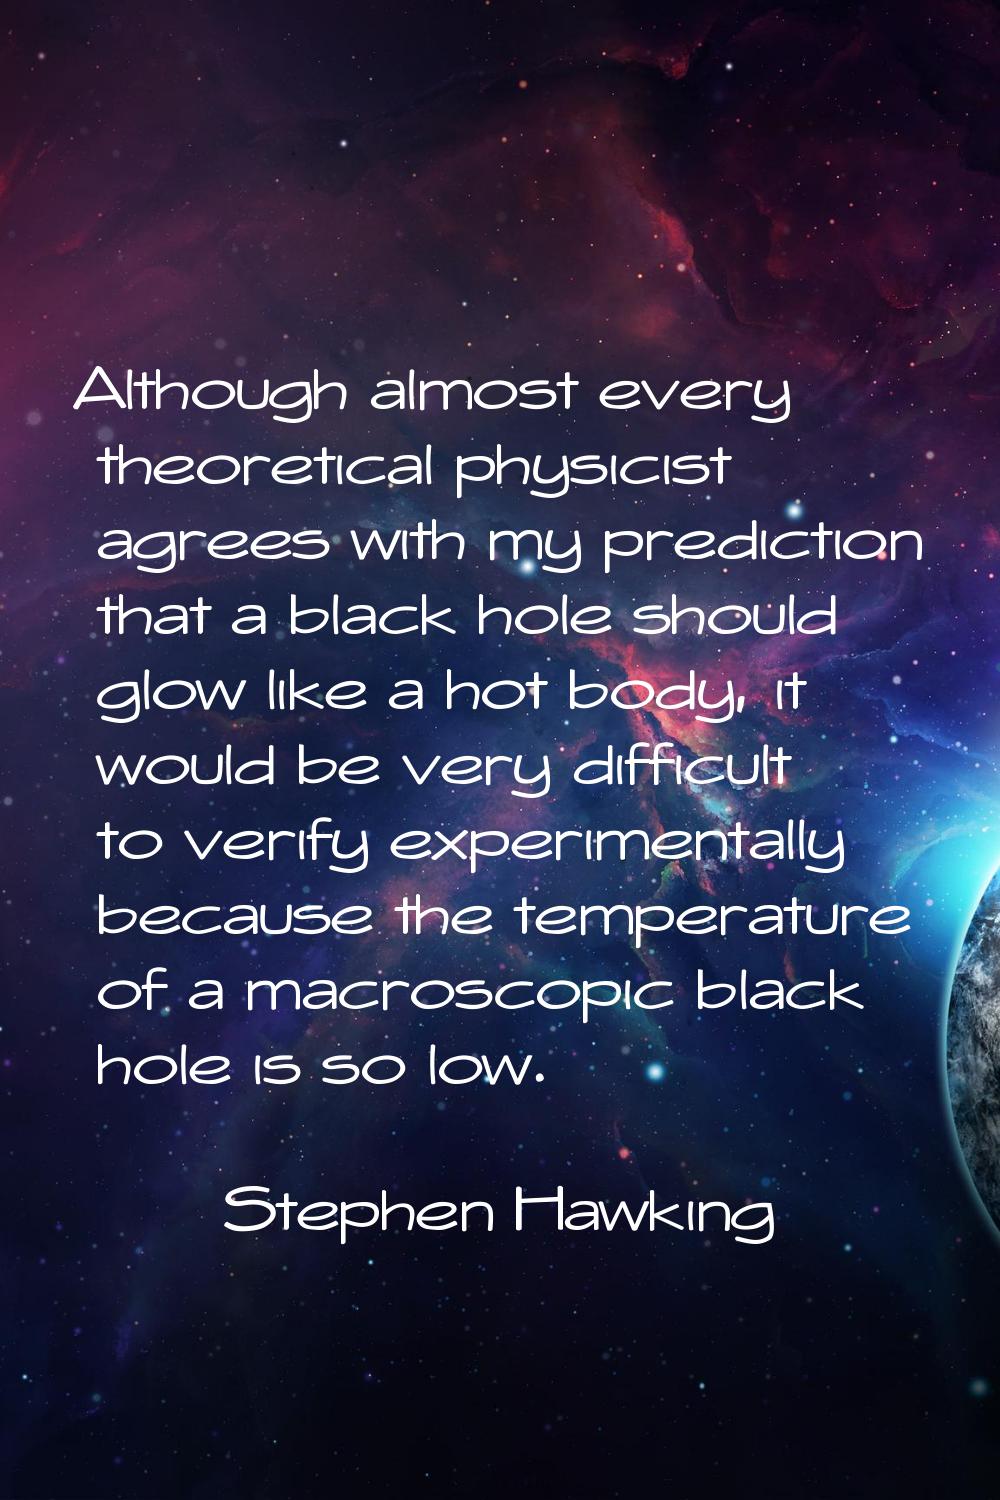 Although almost every theoretical physicist agrees with my prediction that a black hole should glow